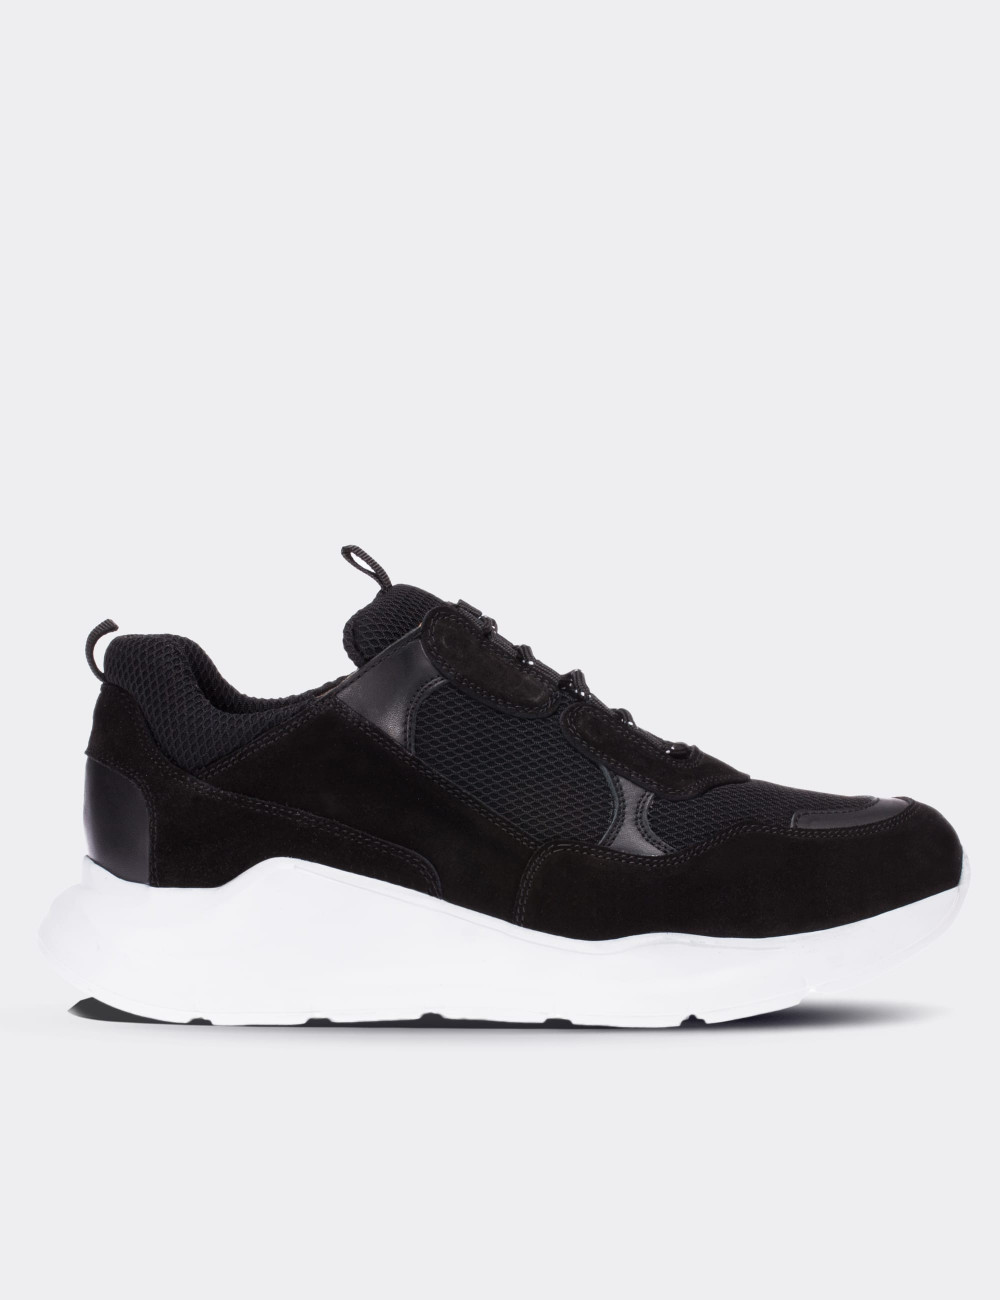 Black Suede Leather Sneakers - 01724MSYHE01